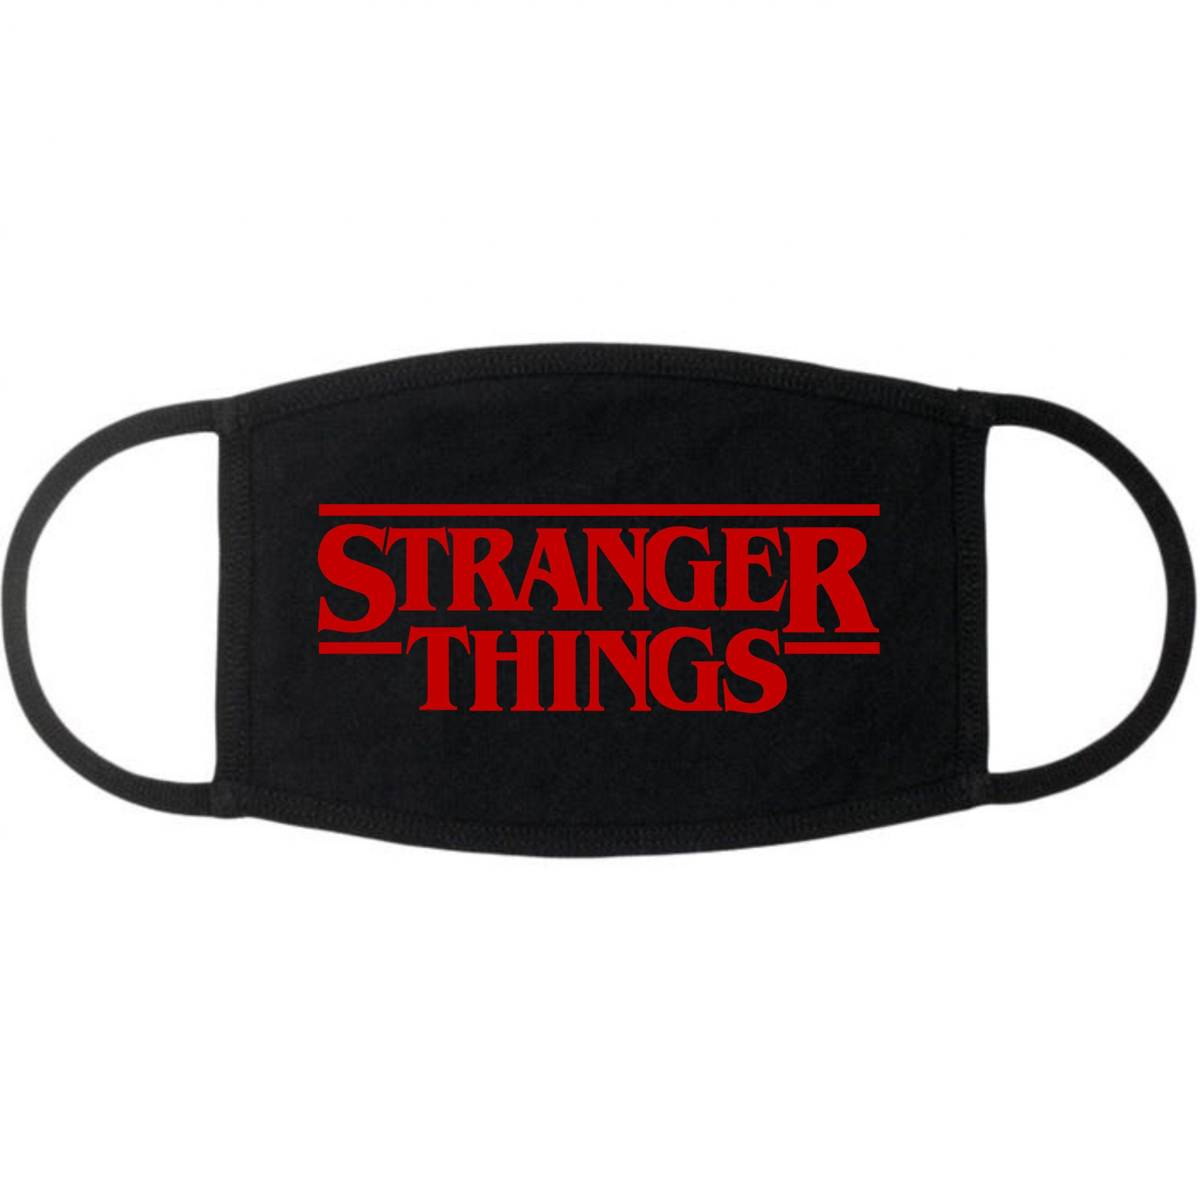 Face Mask/ Stranger Things/ Washable/ Anti Dust/ Reusable/ Mask Cover ...